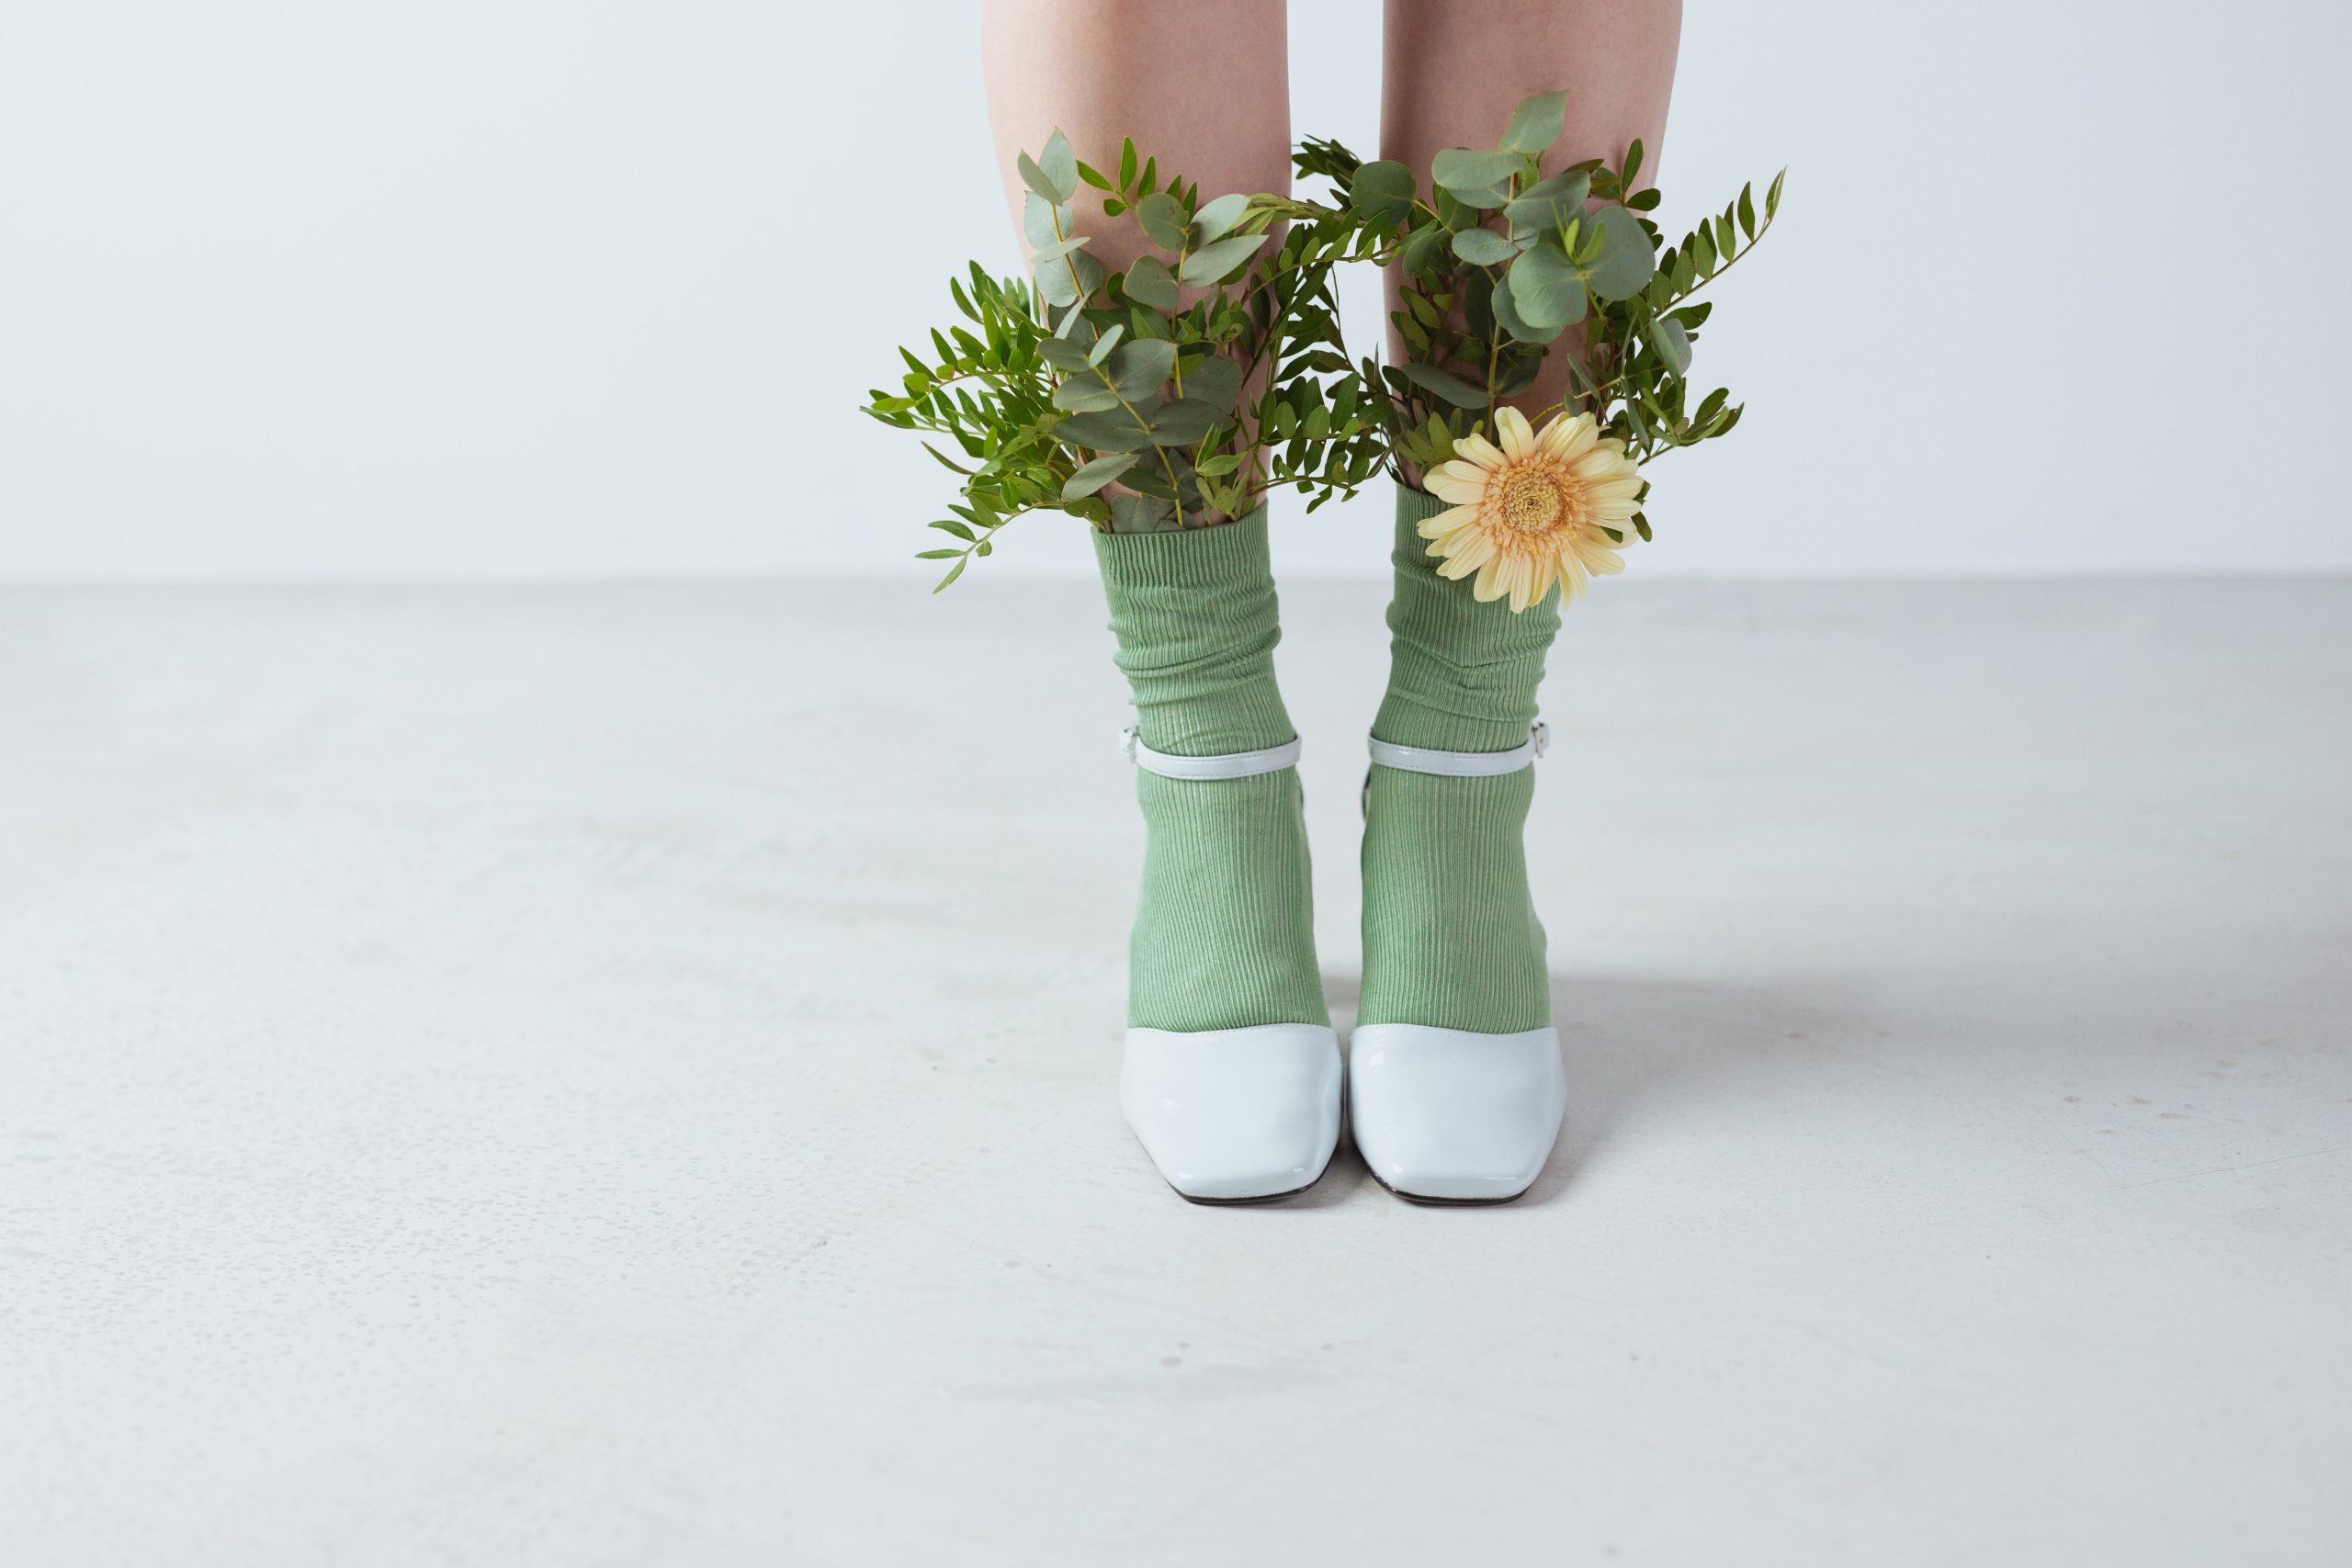 Artsy photo of woman in green socks and white heels with bunches of flowers sticking out the top 